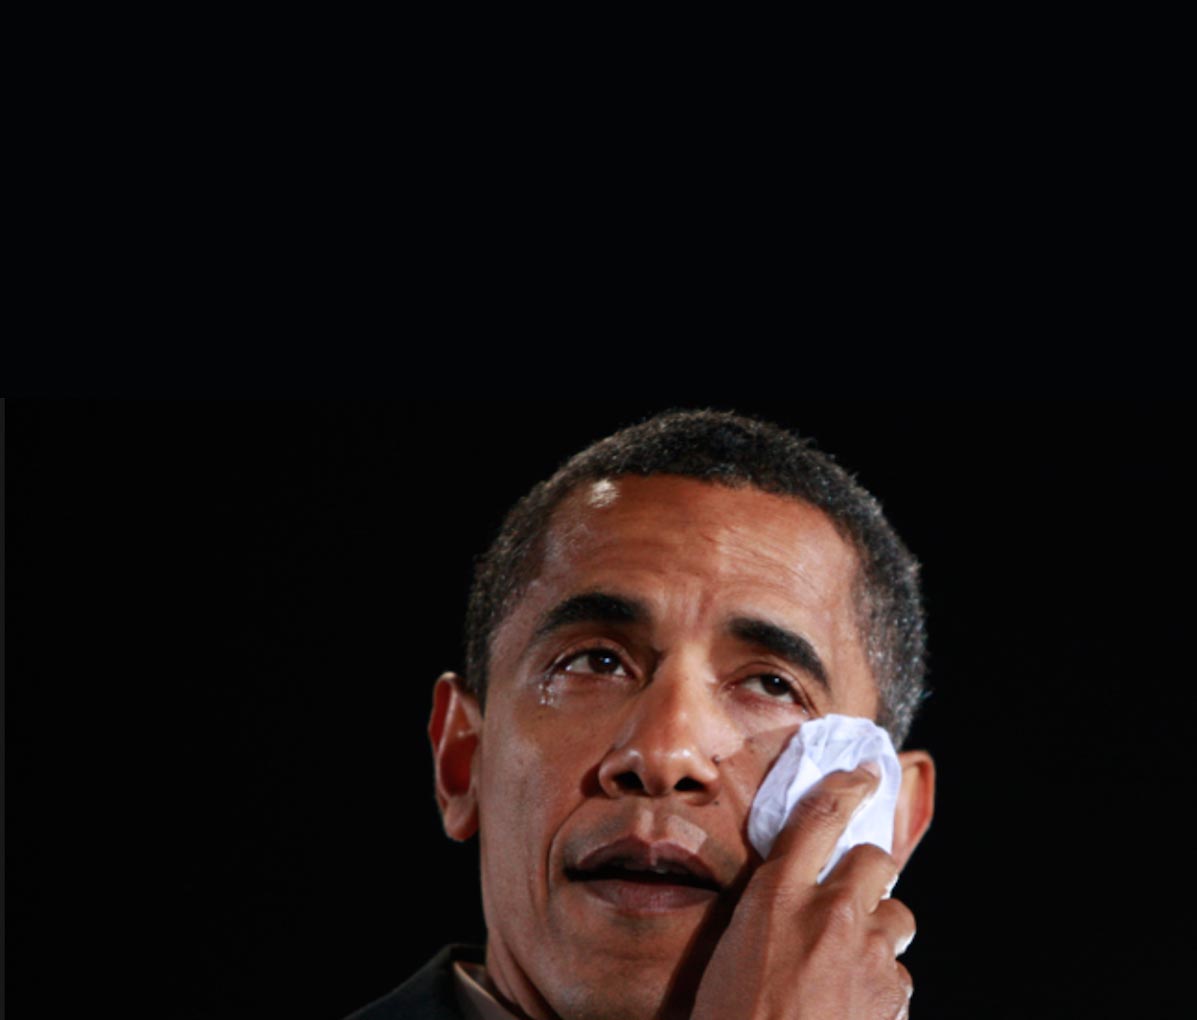 Obama Crying Blank Template Imgflip